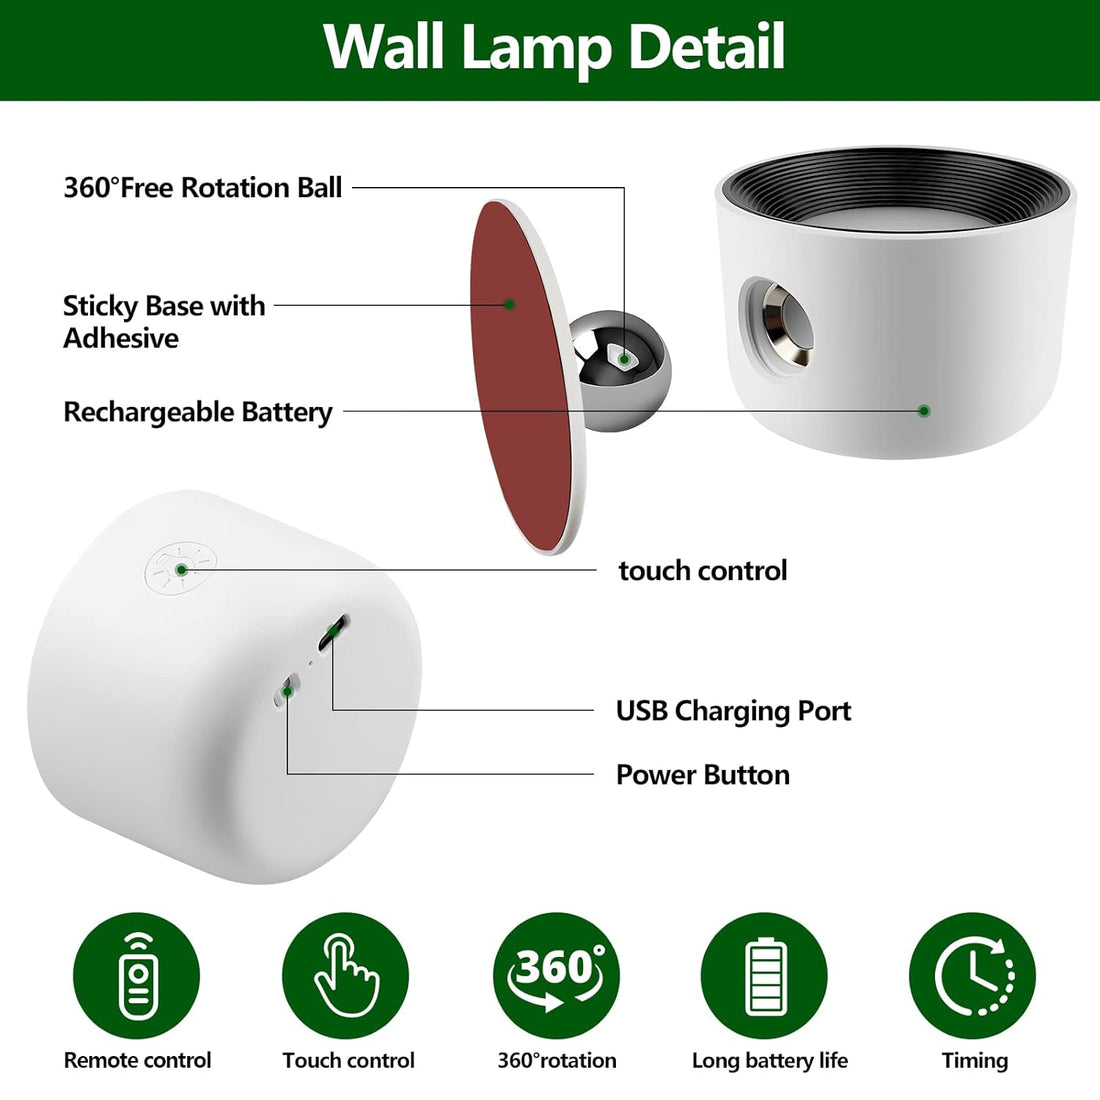 Aisuo LED Wall Light, Touch & Remote Control Light, 7 Color Temperature & 5 Brightness Levels, 360 Degree Rotate Ball, Built-in 2500mAh Battery, Rechargeable Wall Light for Bedroom, Living Room